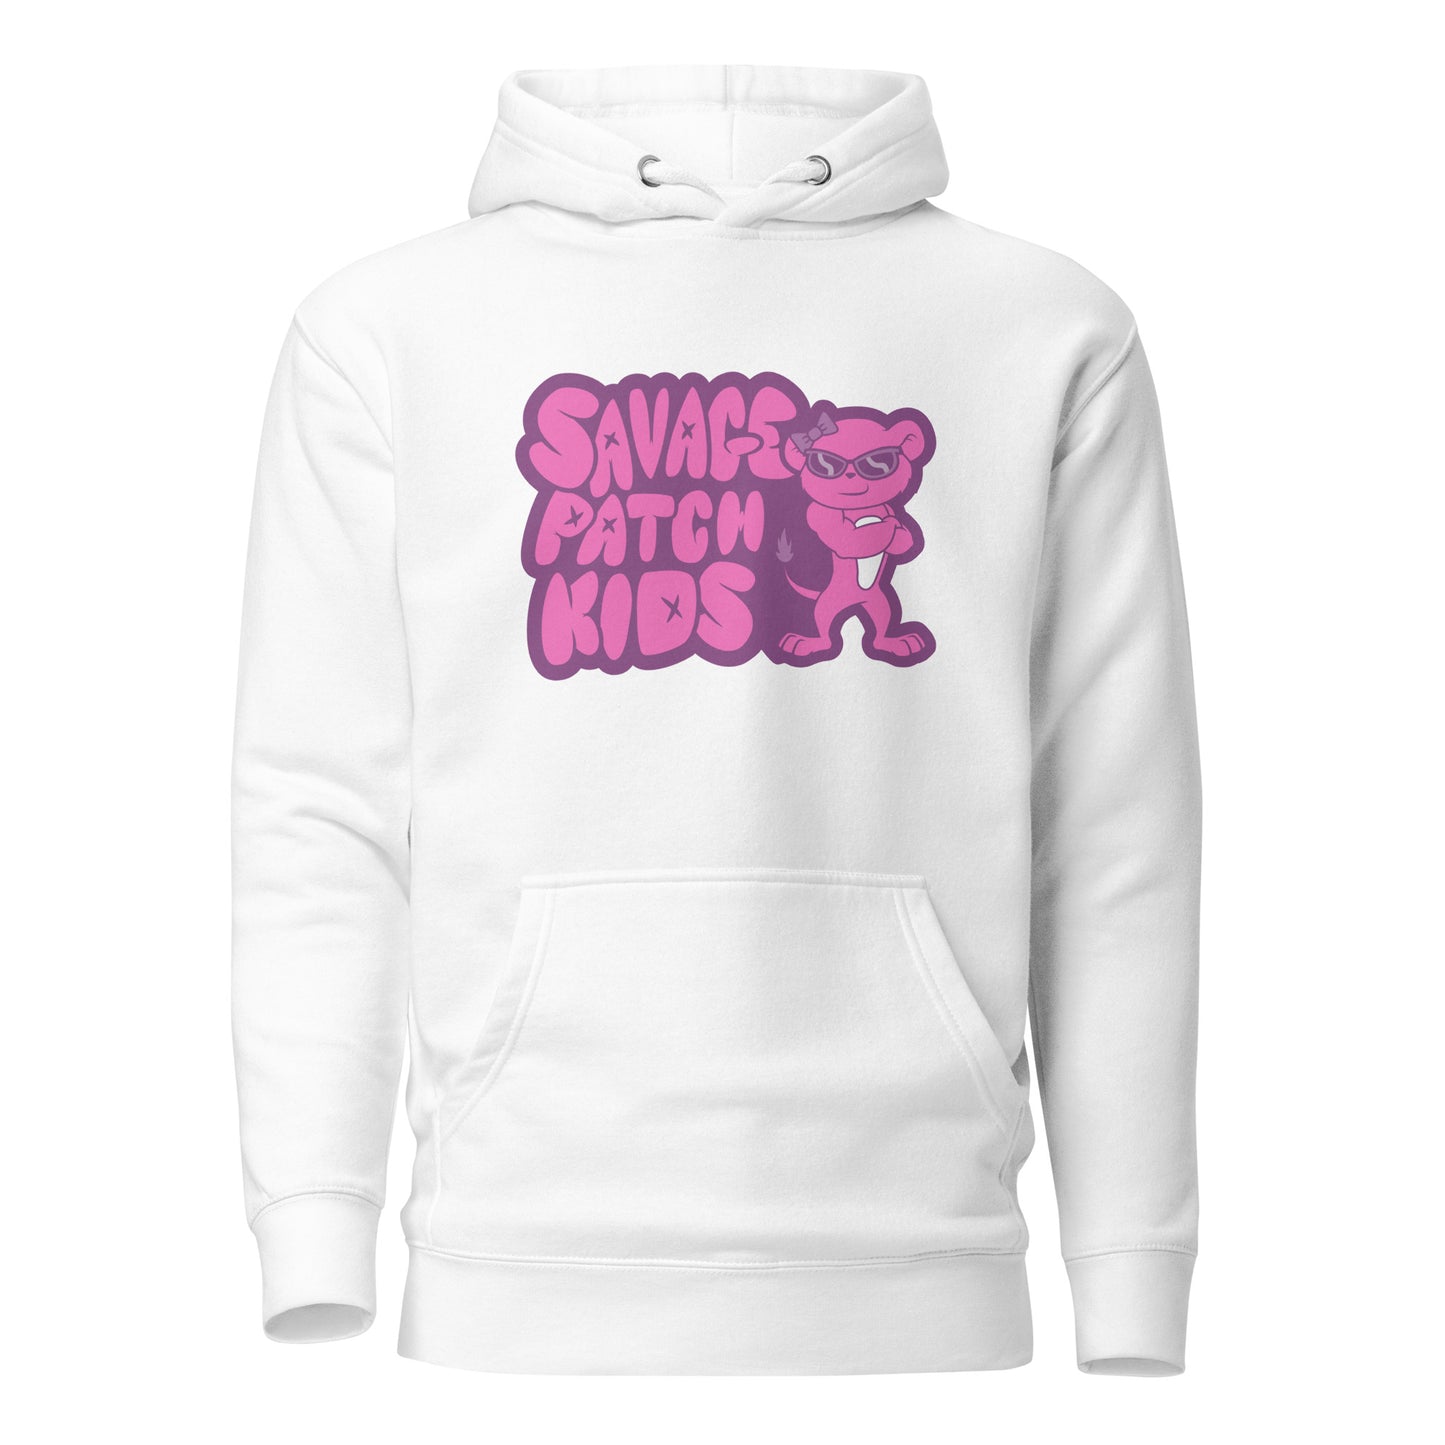 Adult "Patch" in Pink Hoodie